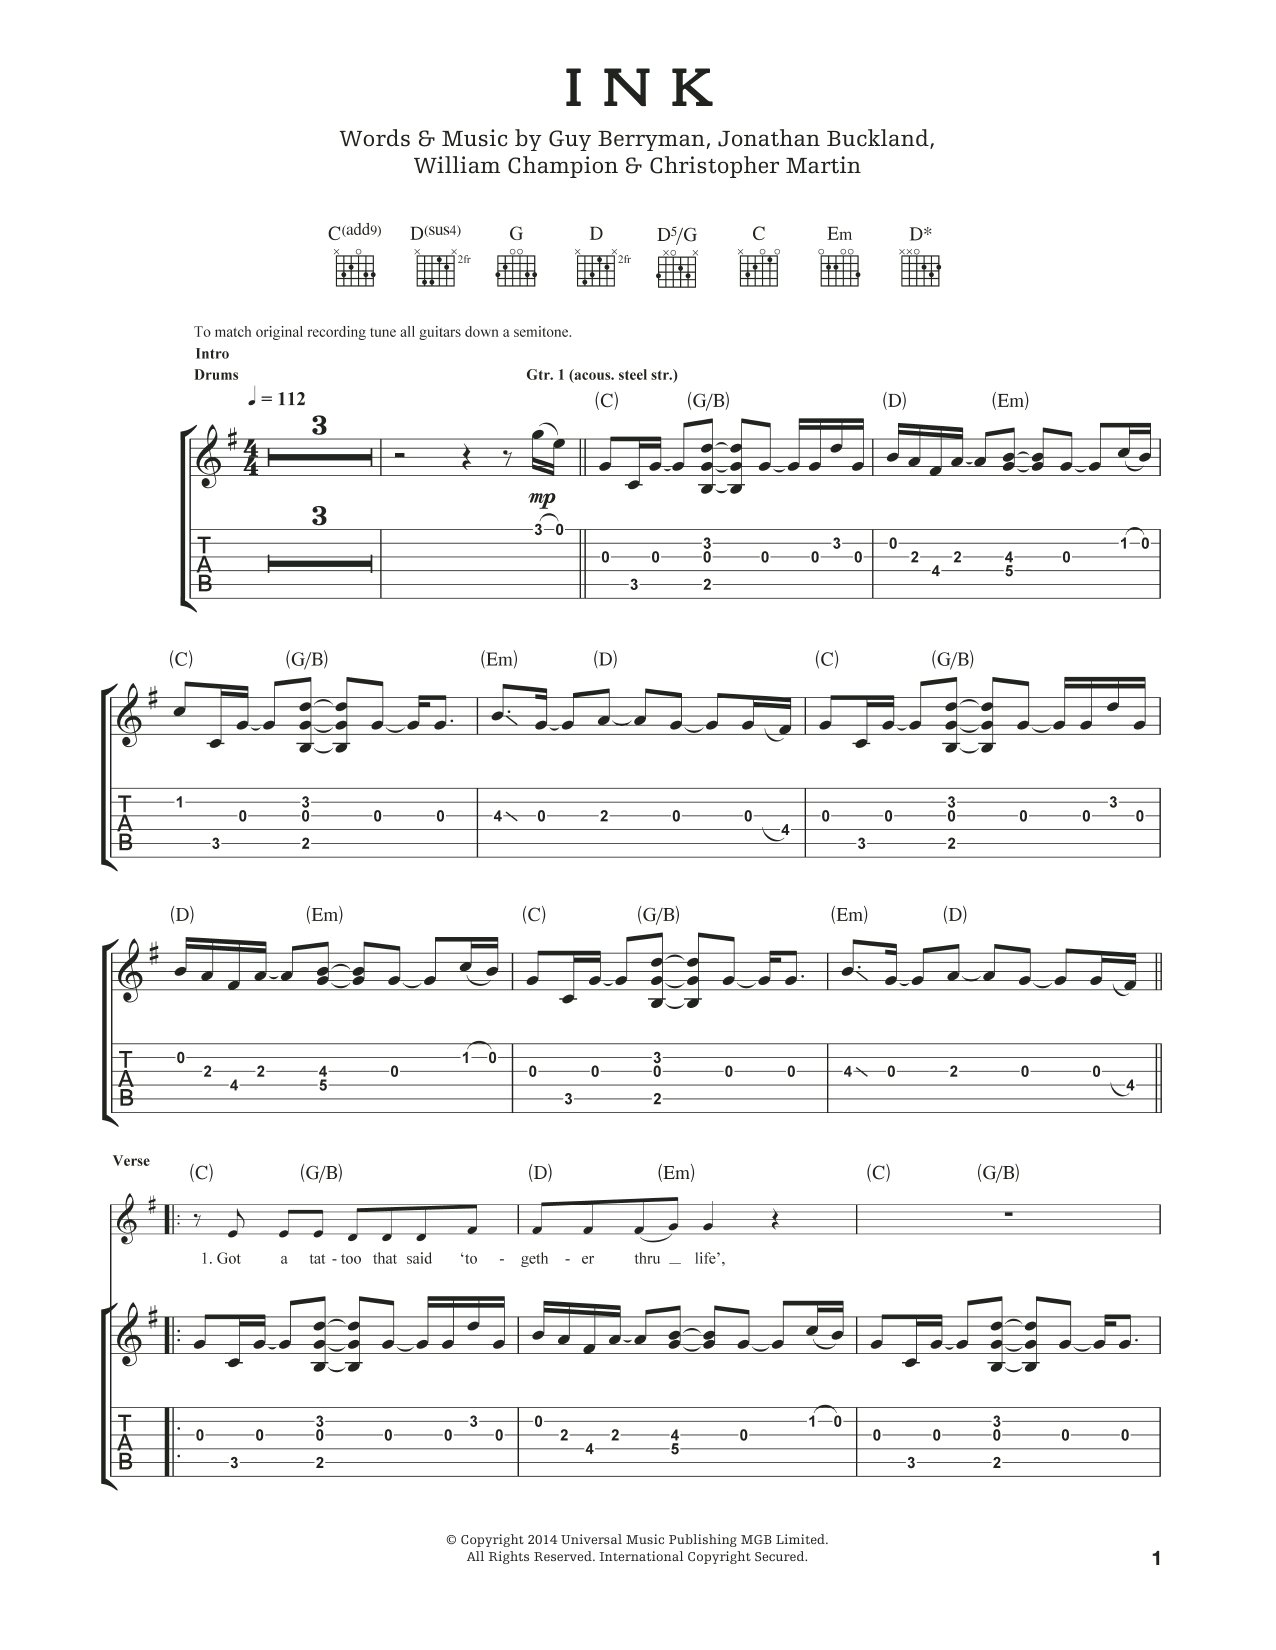 Download Coldplay Ink Sheet Music